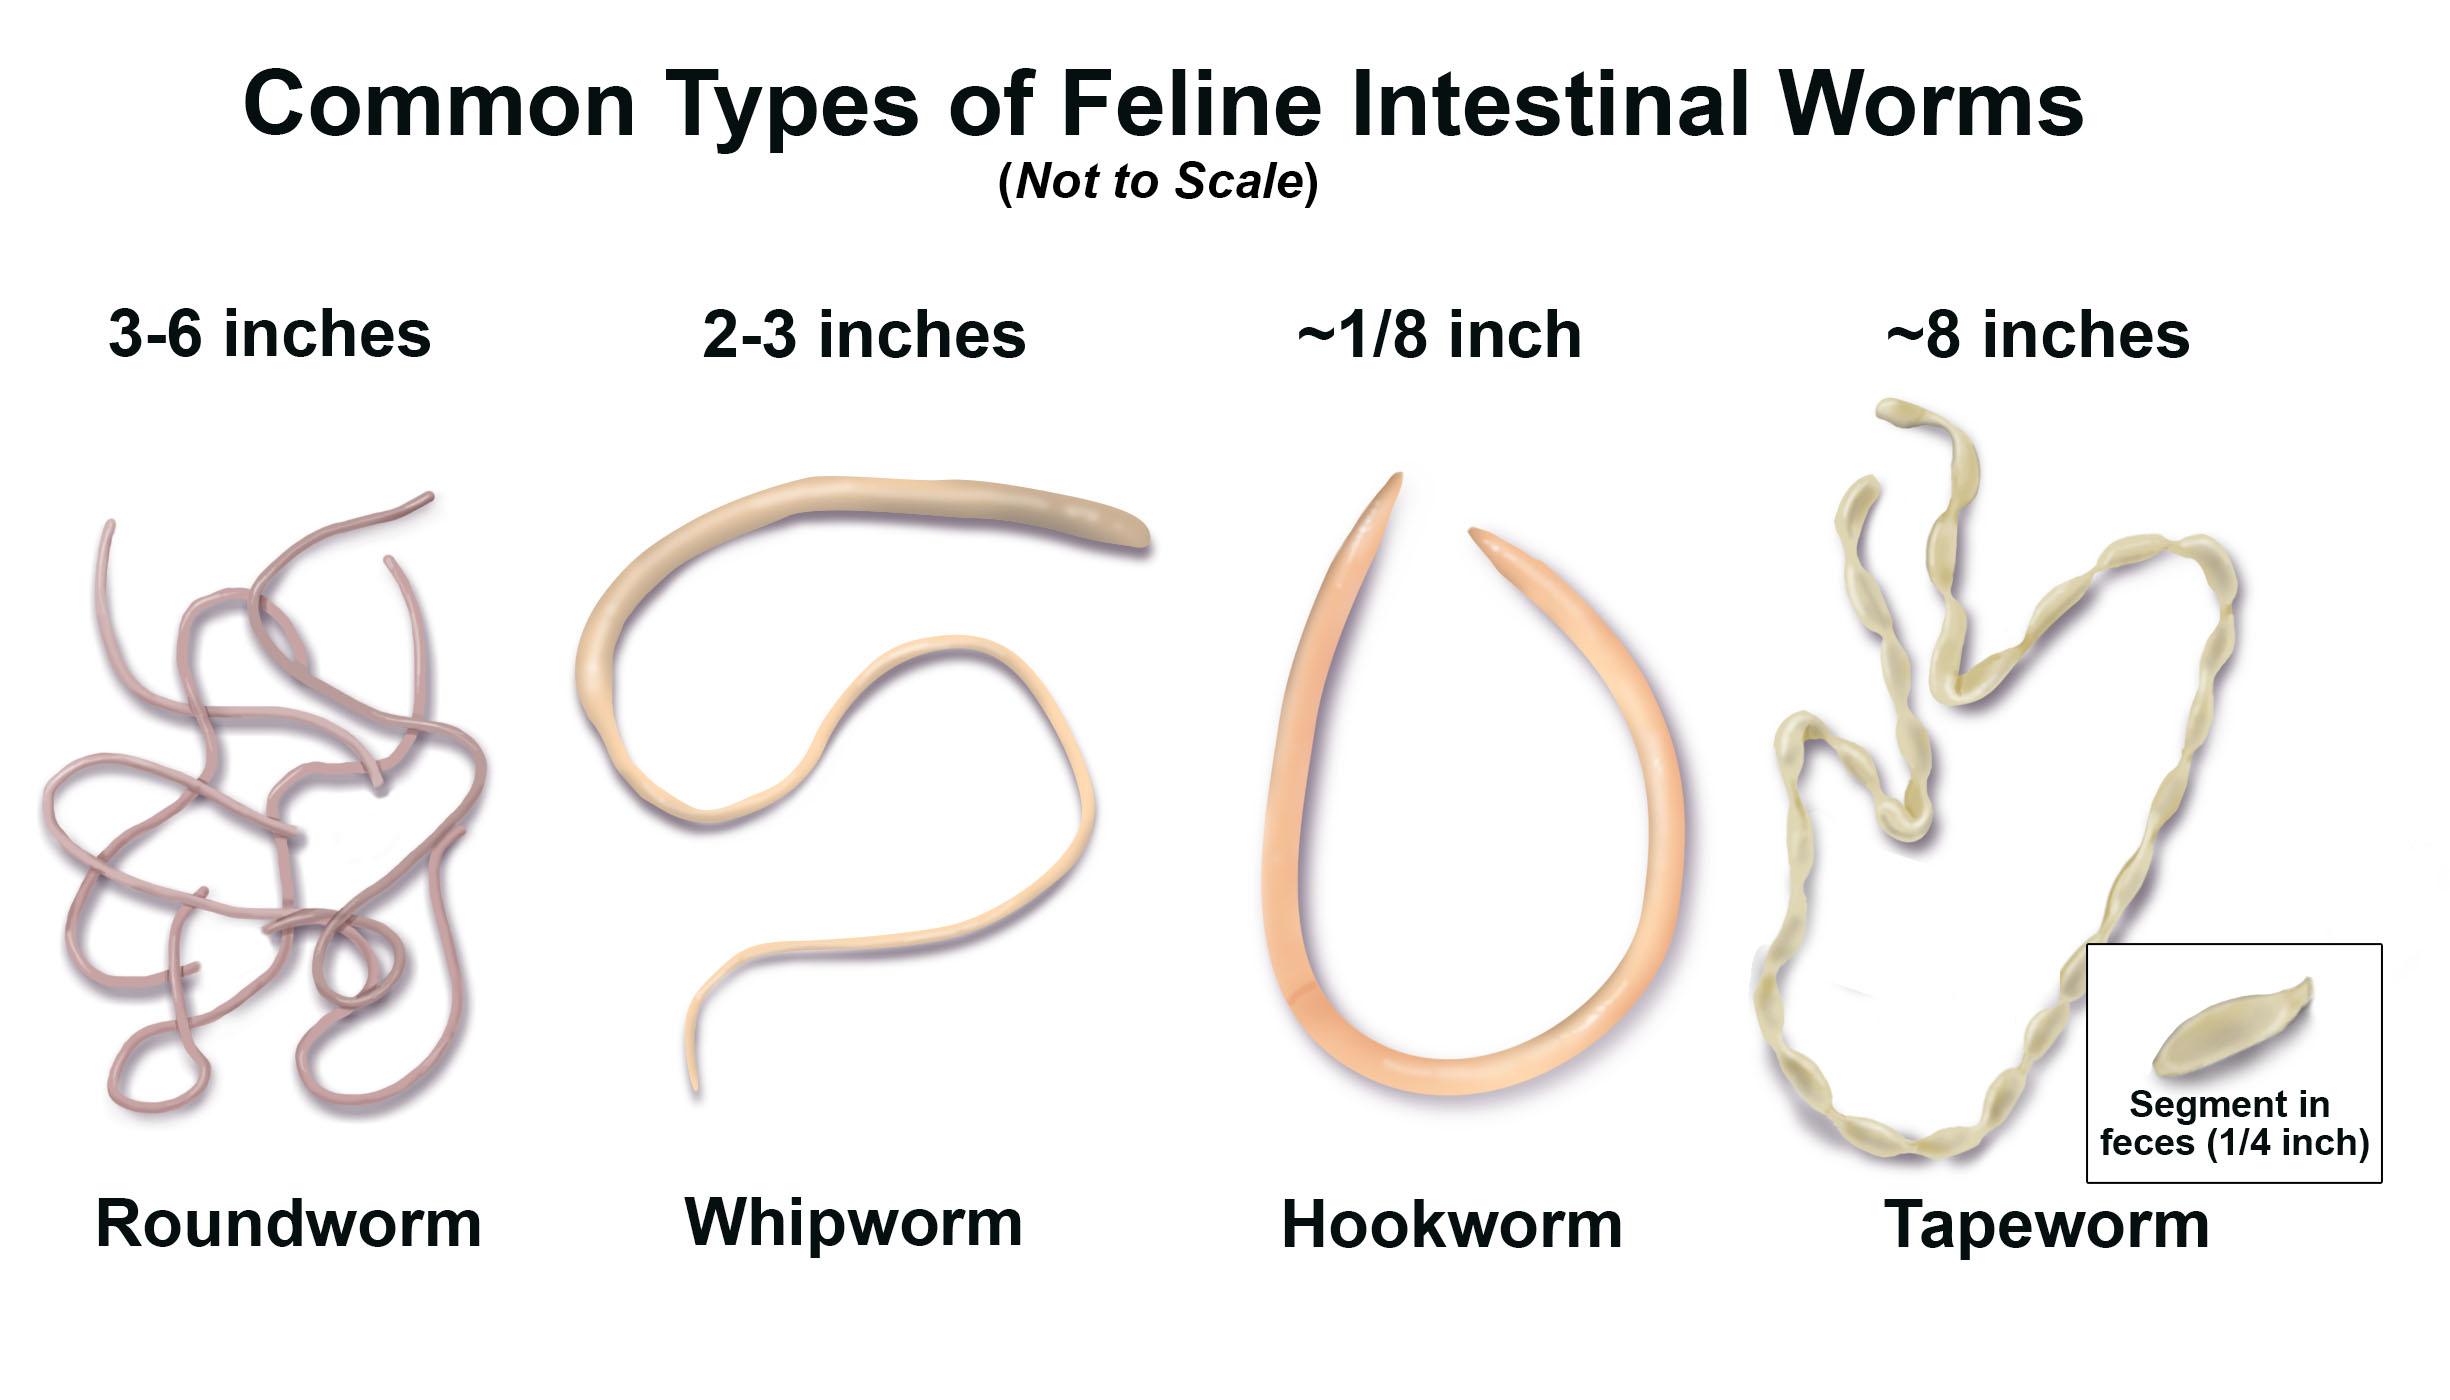 Common Types of Intestinal Worms.jpg